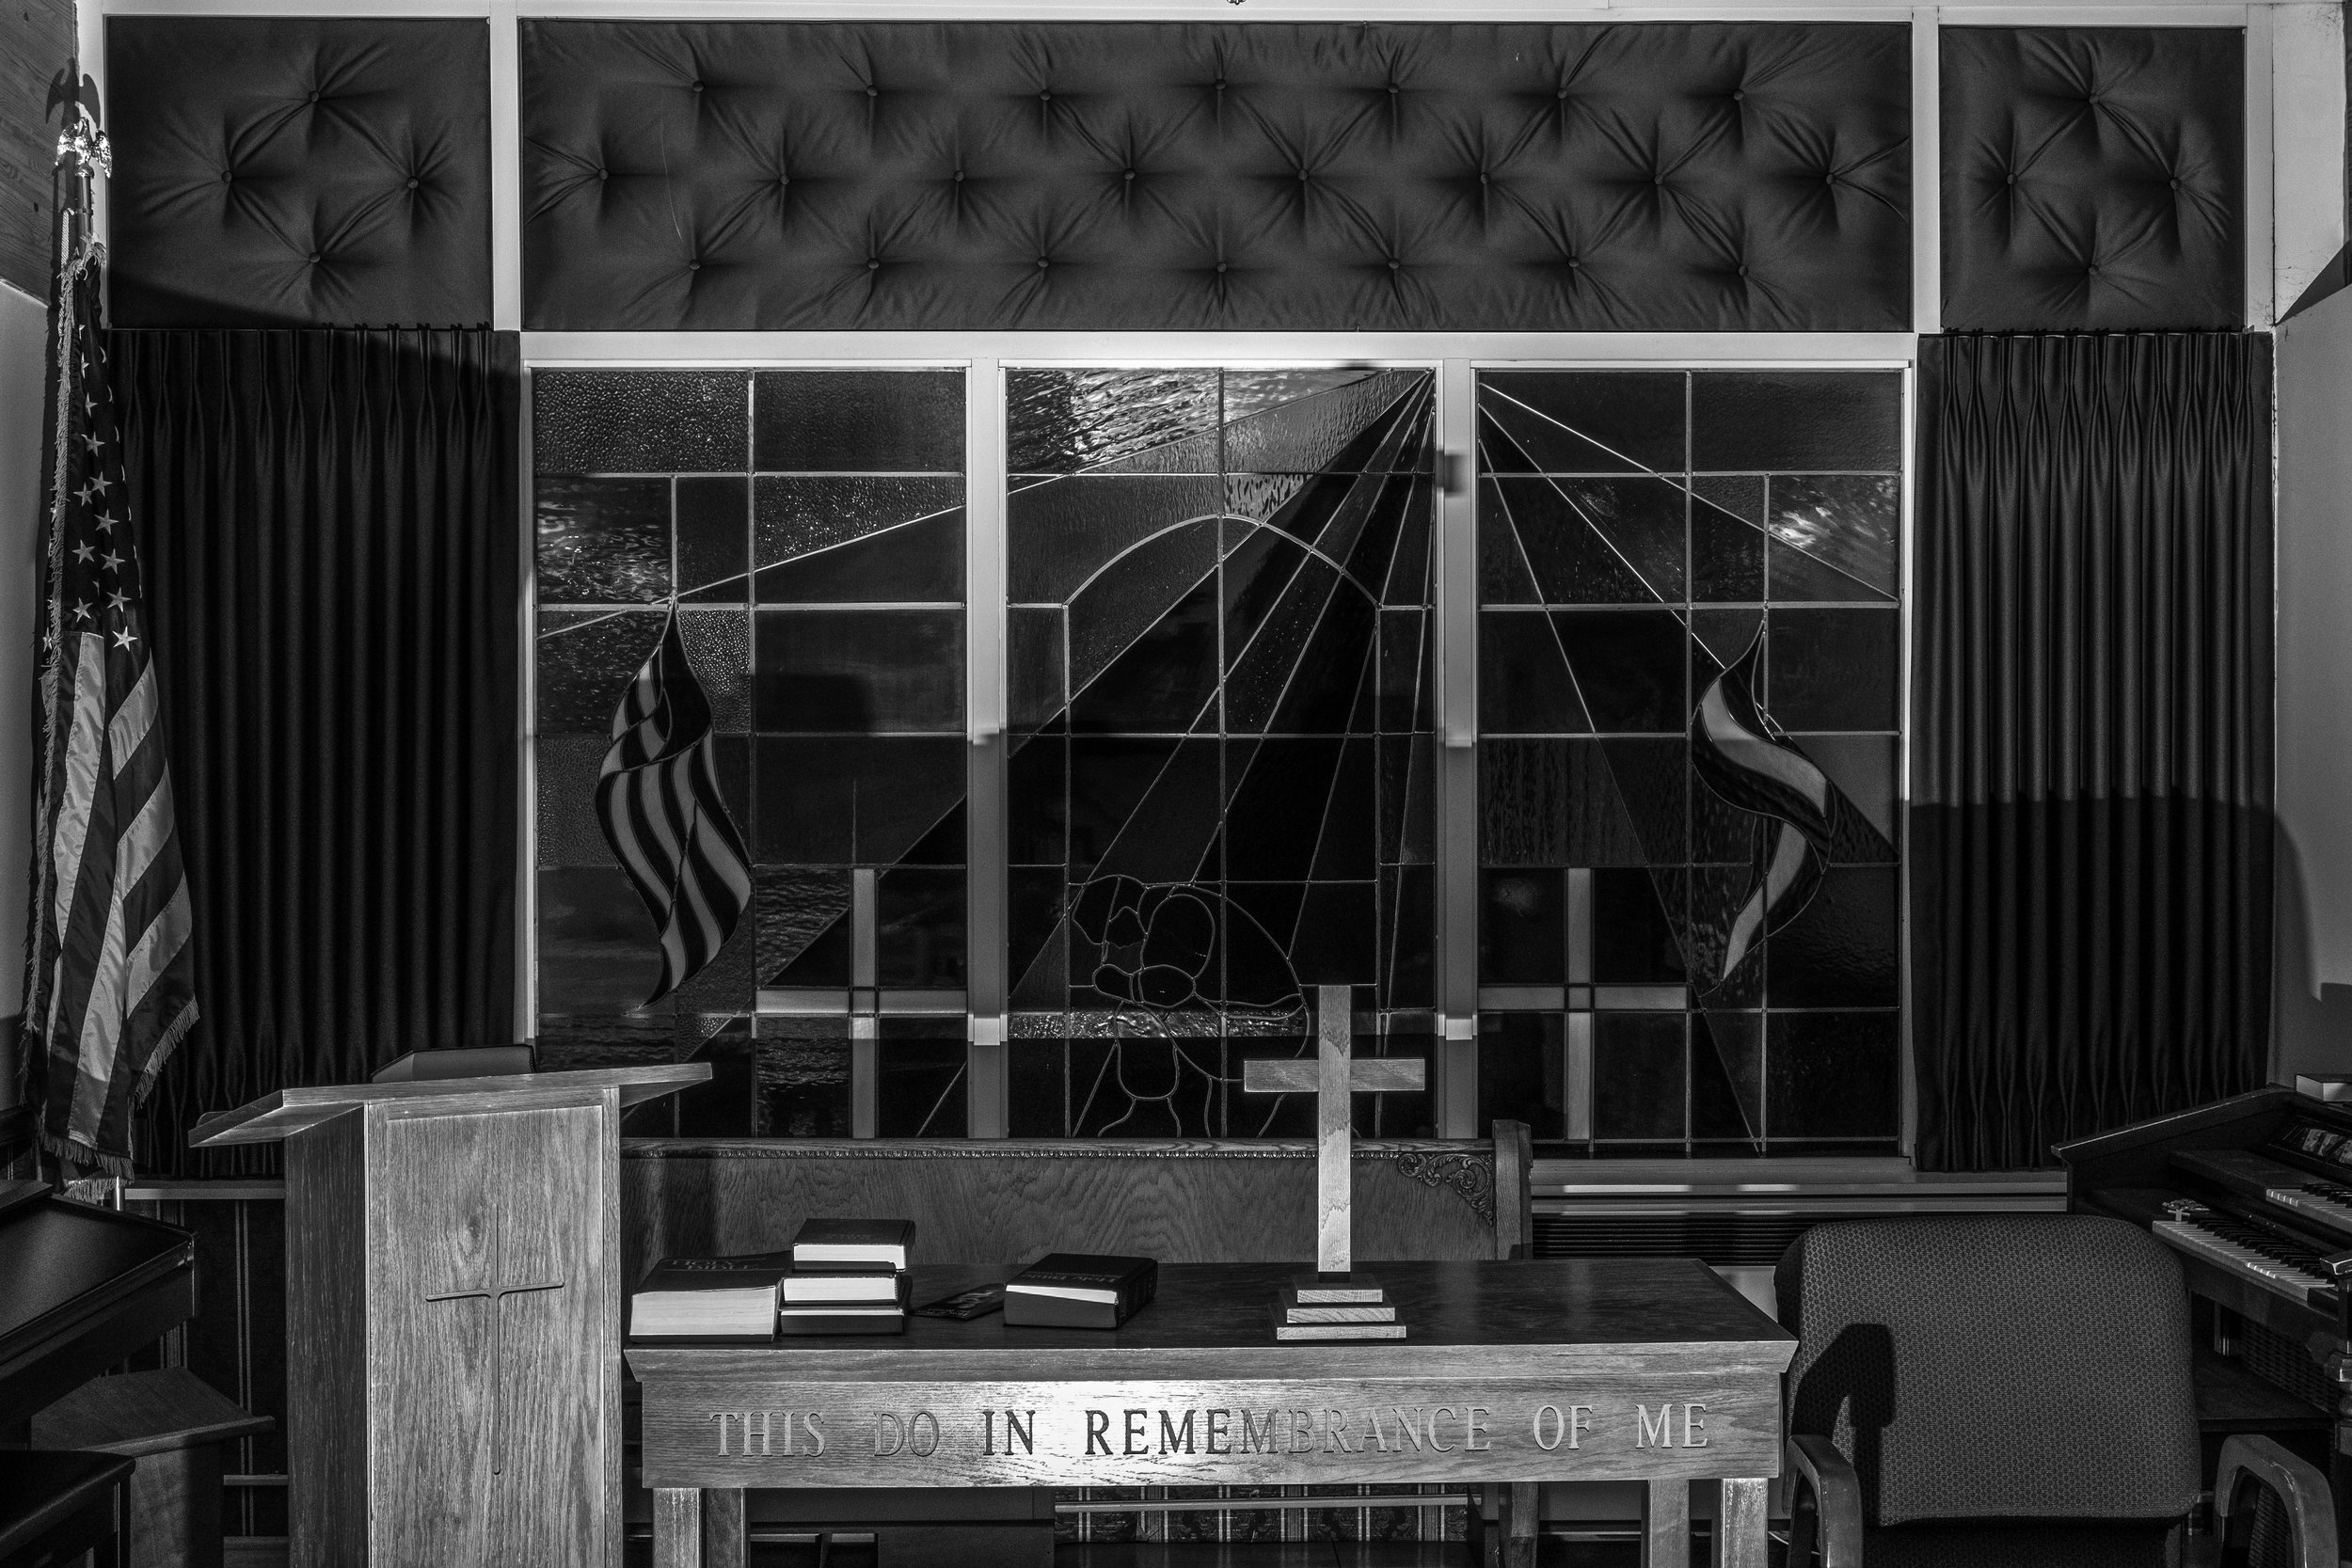  The chapel as seen at the Missouri Veterans Home in Mexico, Missouri on Friday, Jun. 21, 2019. 